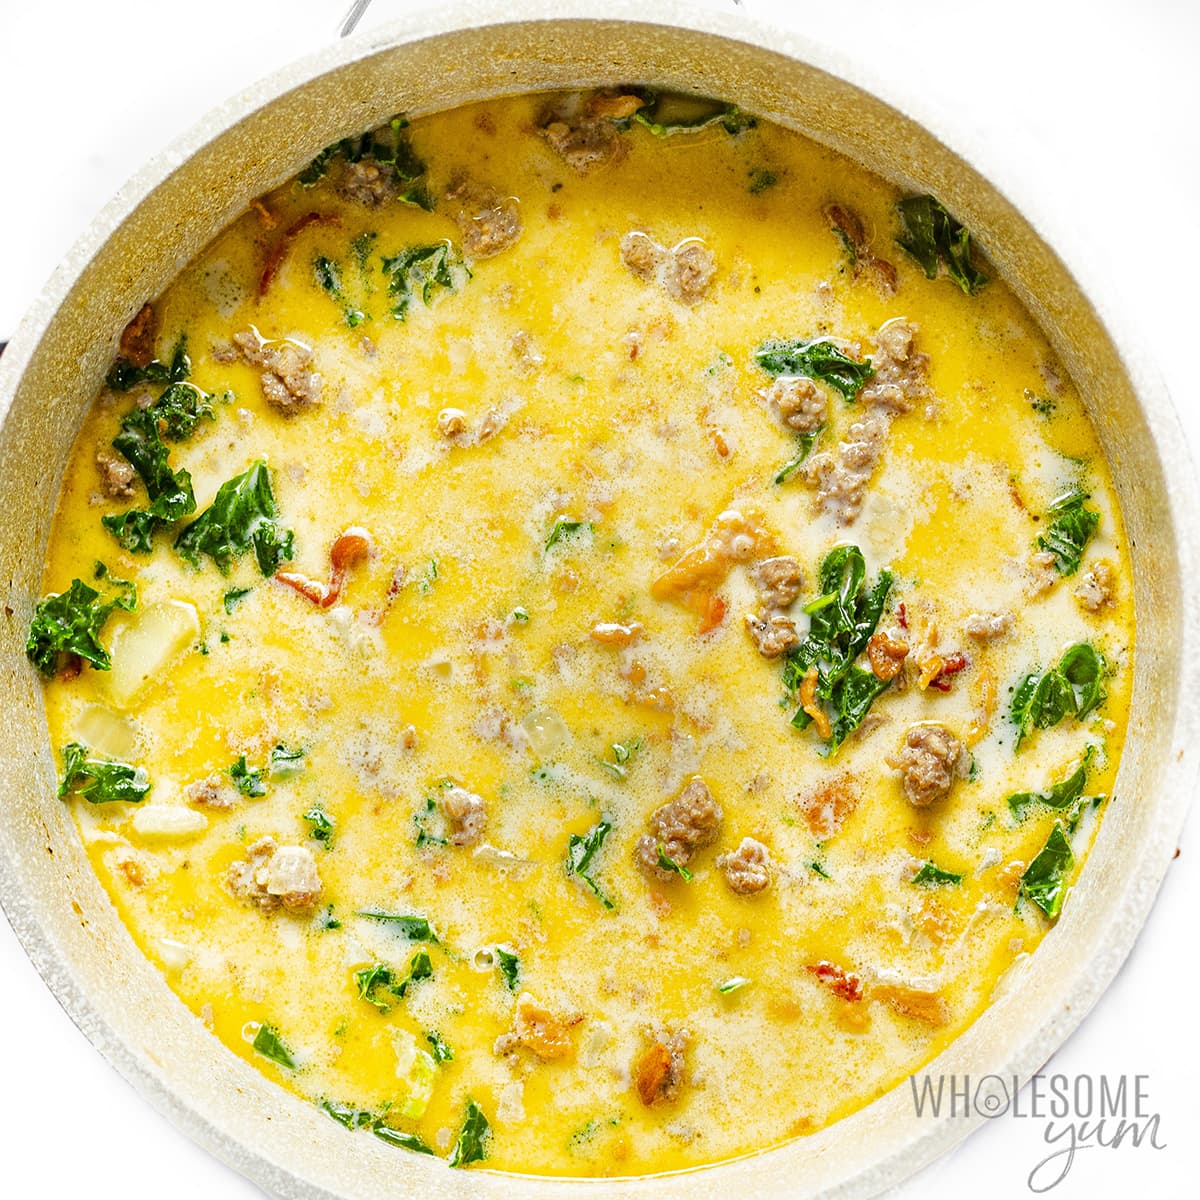 Zuppa toscana soup in a bowl.